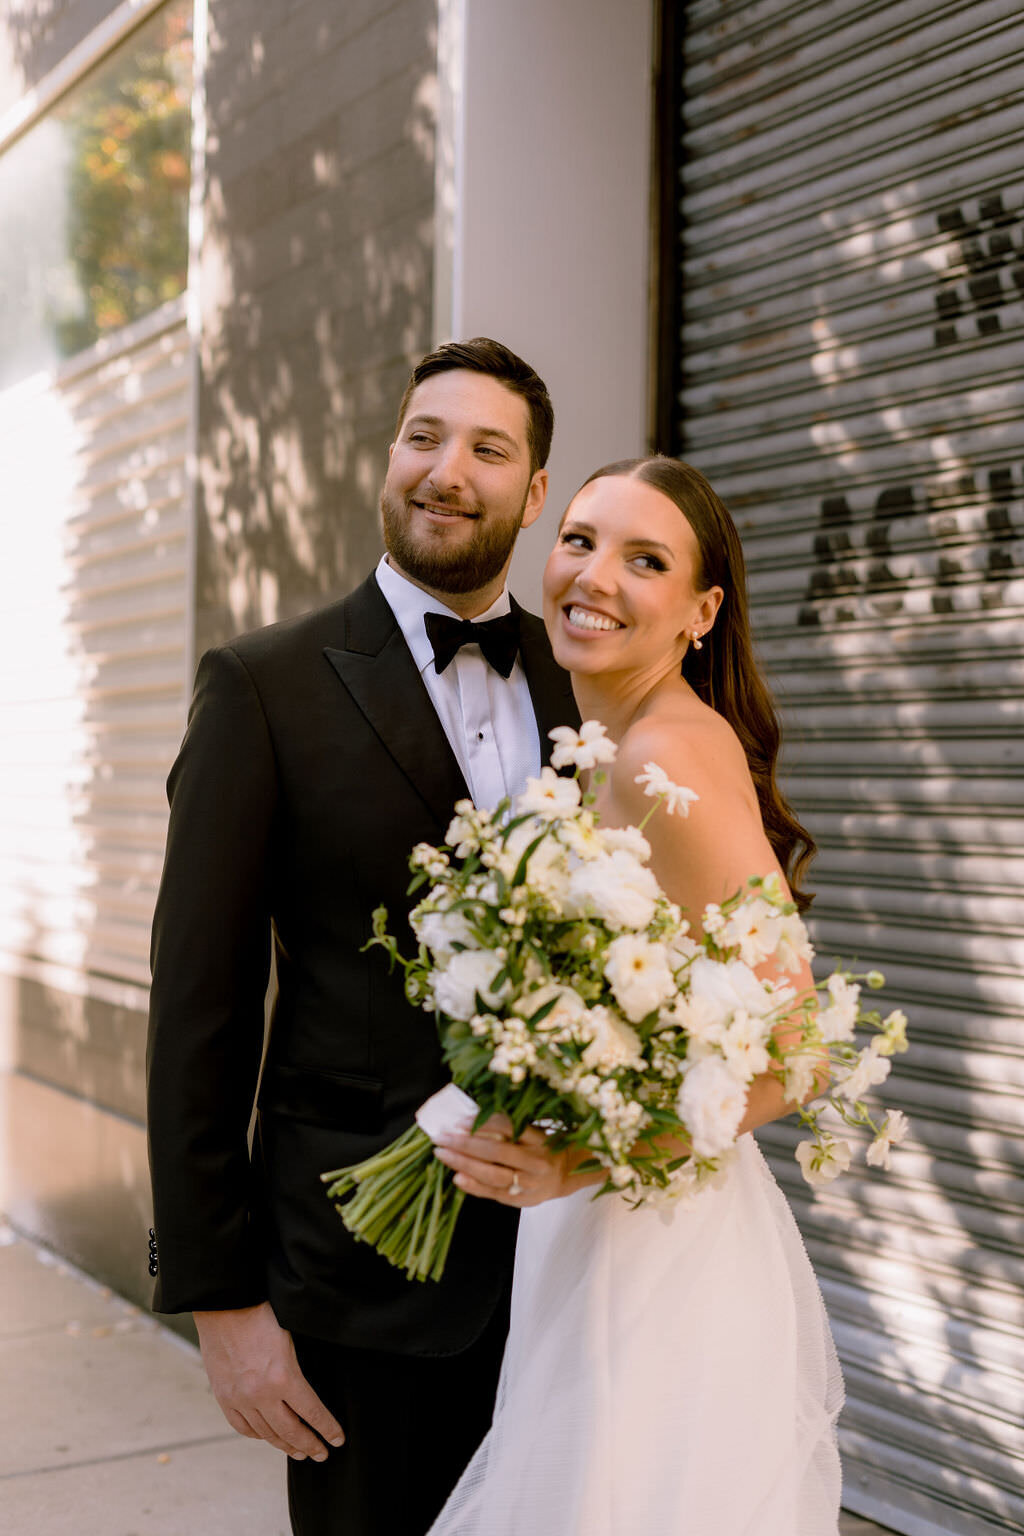 bride and groom standing next to each other smiling while she holds a bouquet